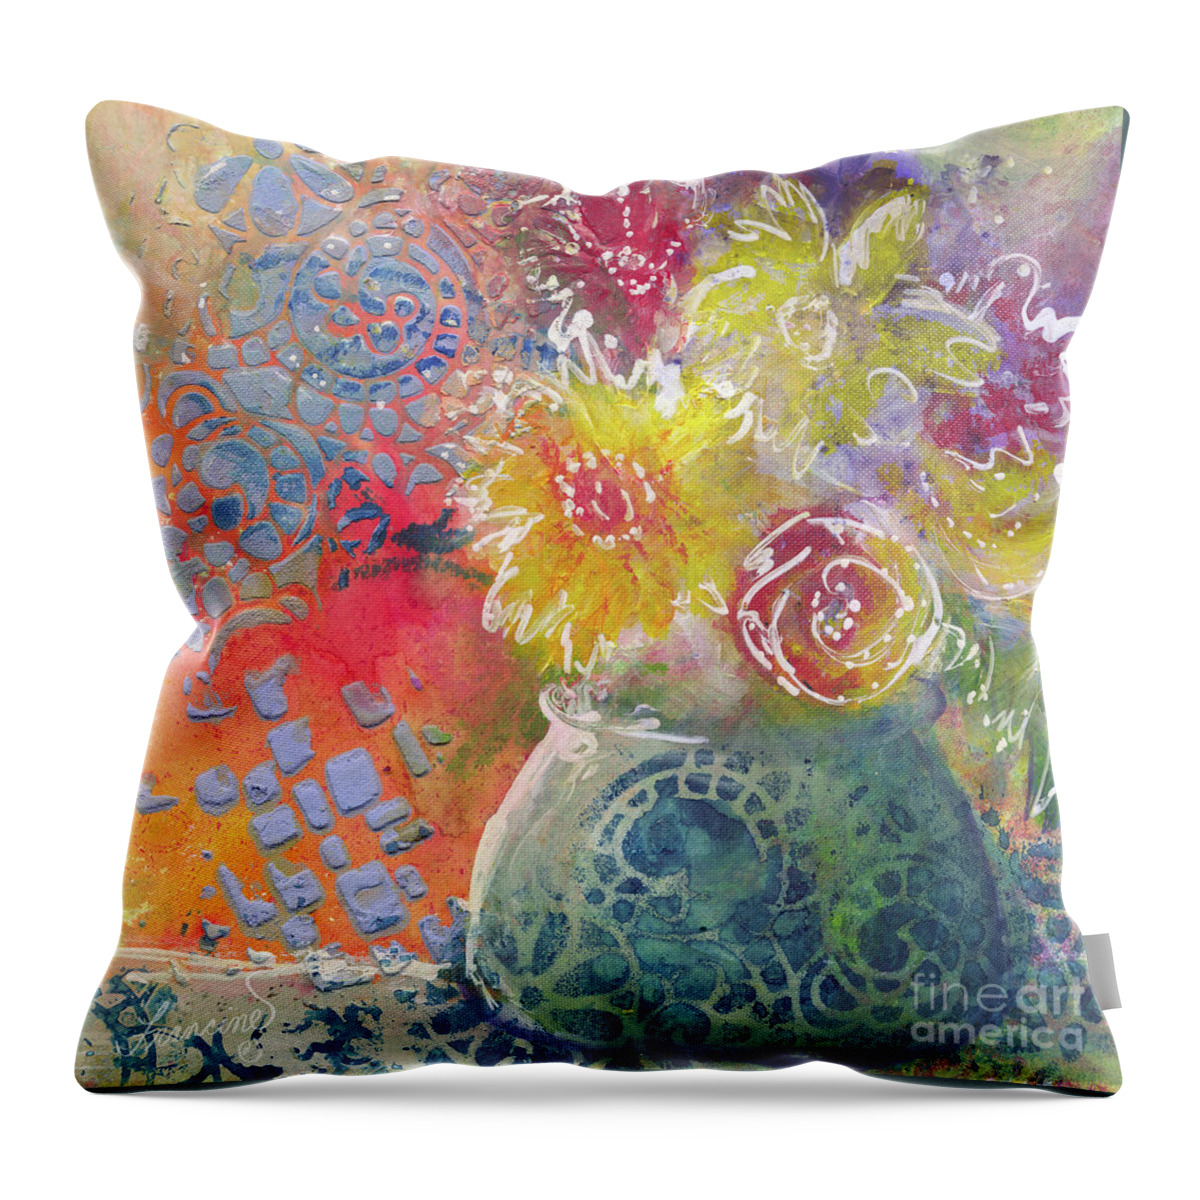 Mixed Media Throw Pillow featuring the mixed media Marabu Flowers 1 by Francine Dufour Jones